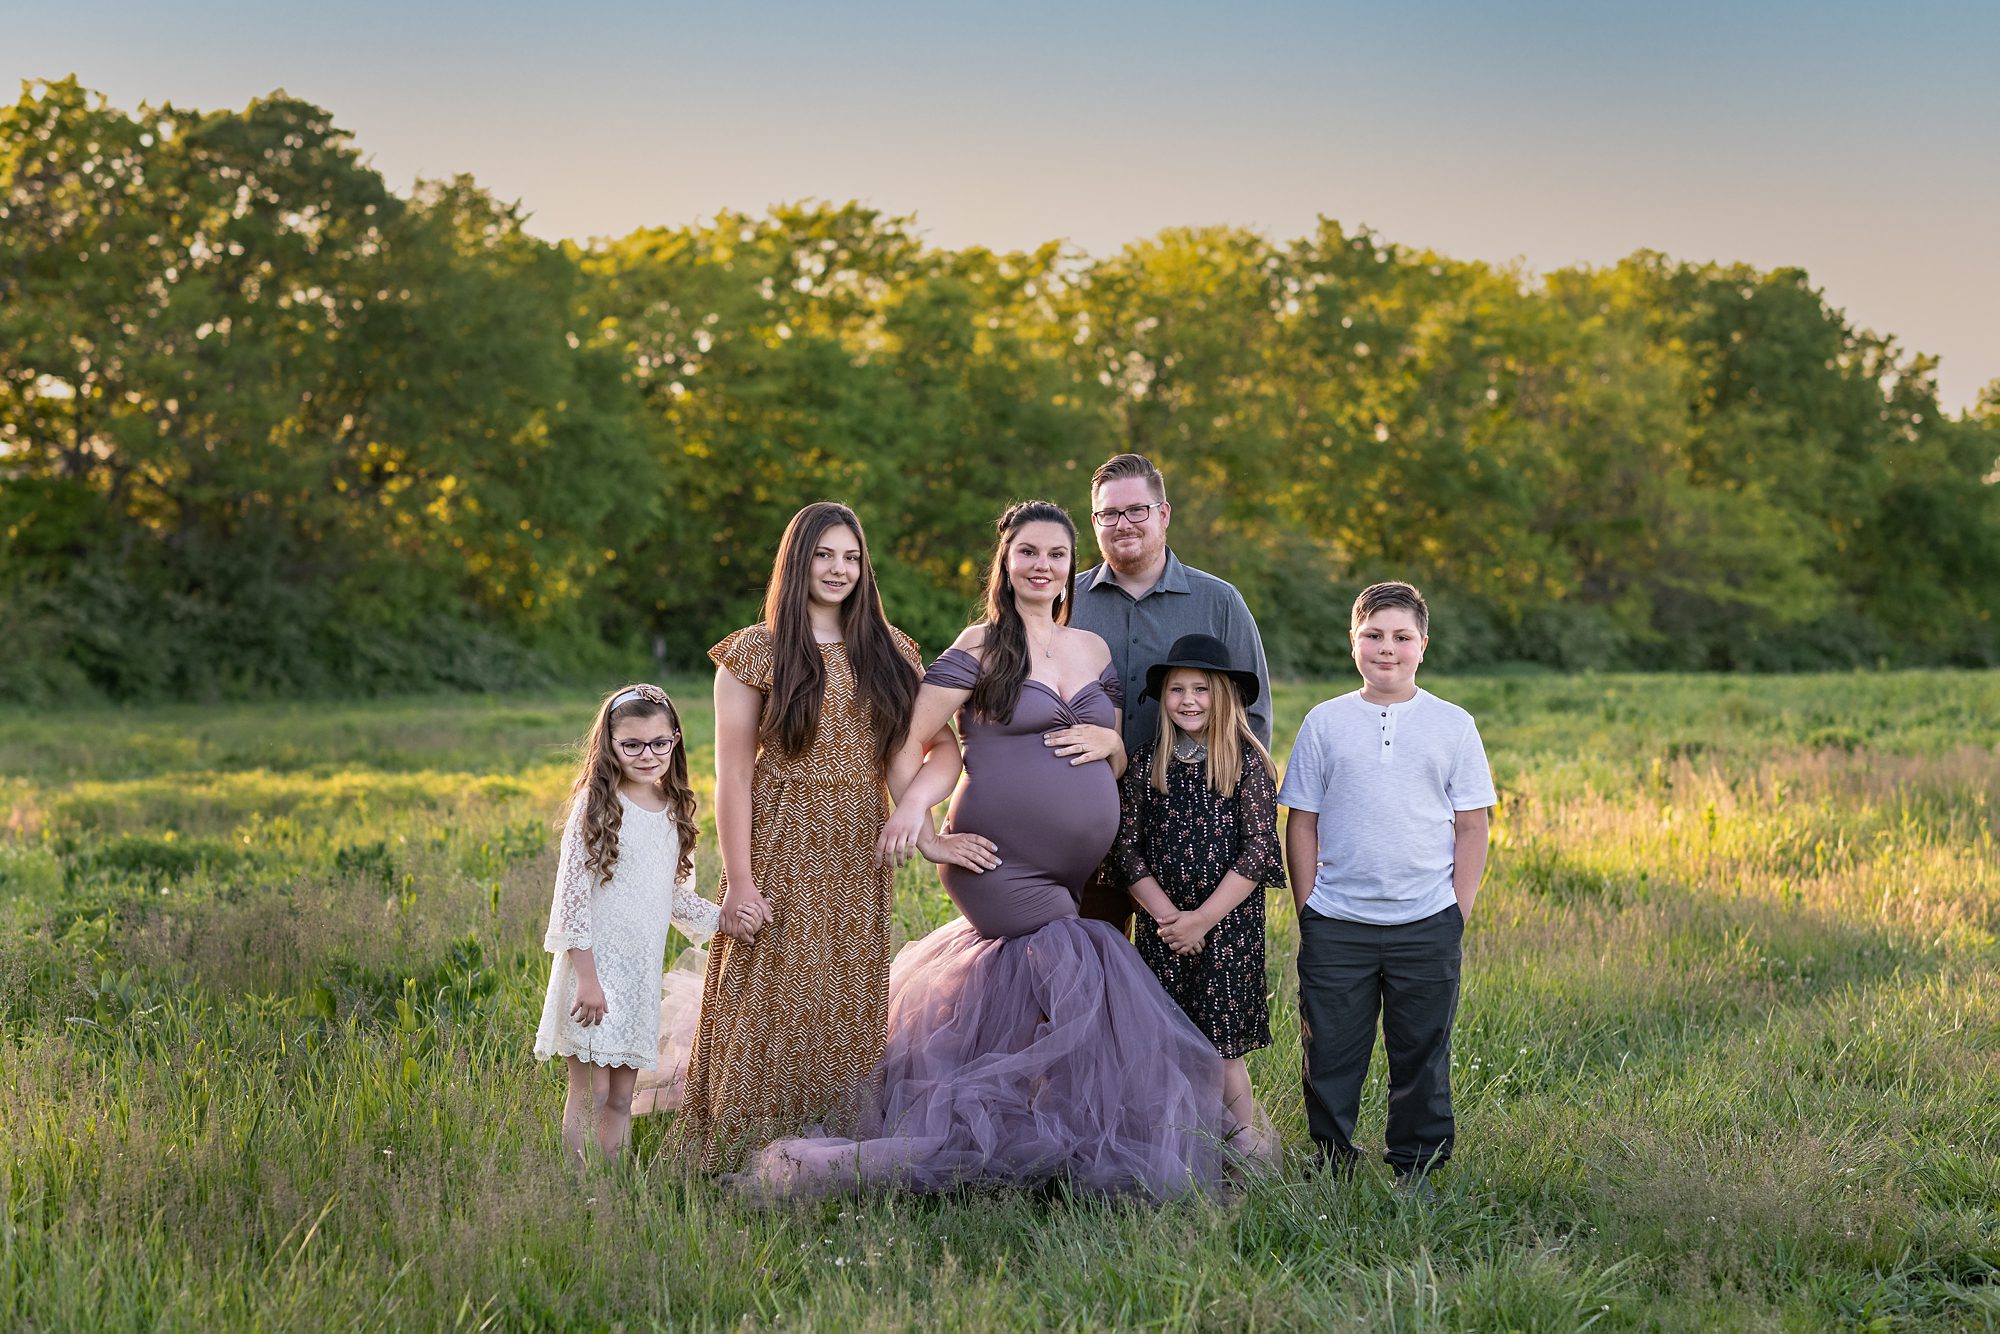 Outdoor family portrait, with 4 children and expectant mother. Mom is in an elegant maternity gown from the photography studio's dress collection. Photographed in Kansas City by Faces You Love.